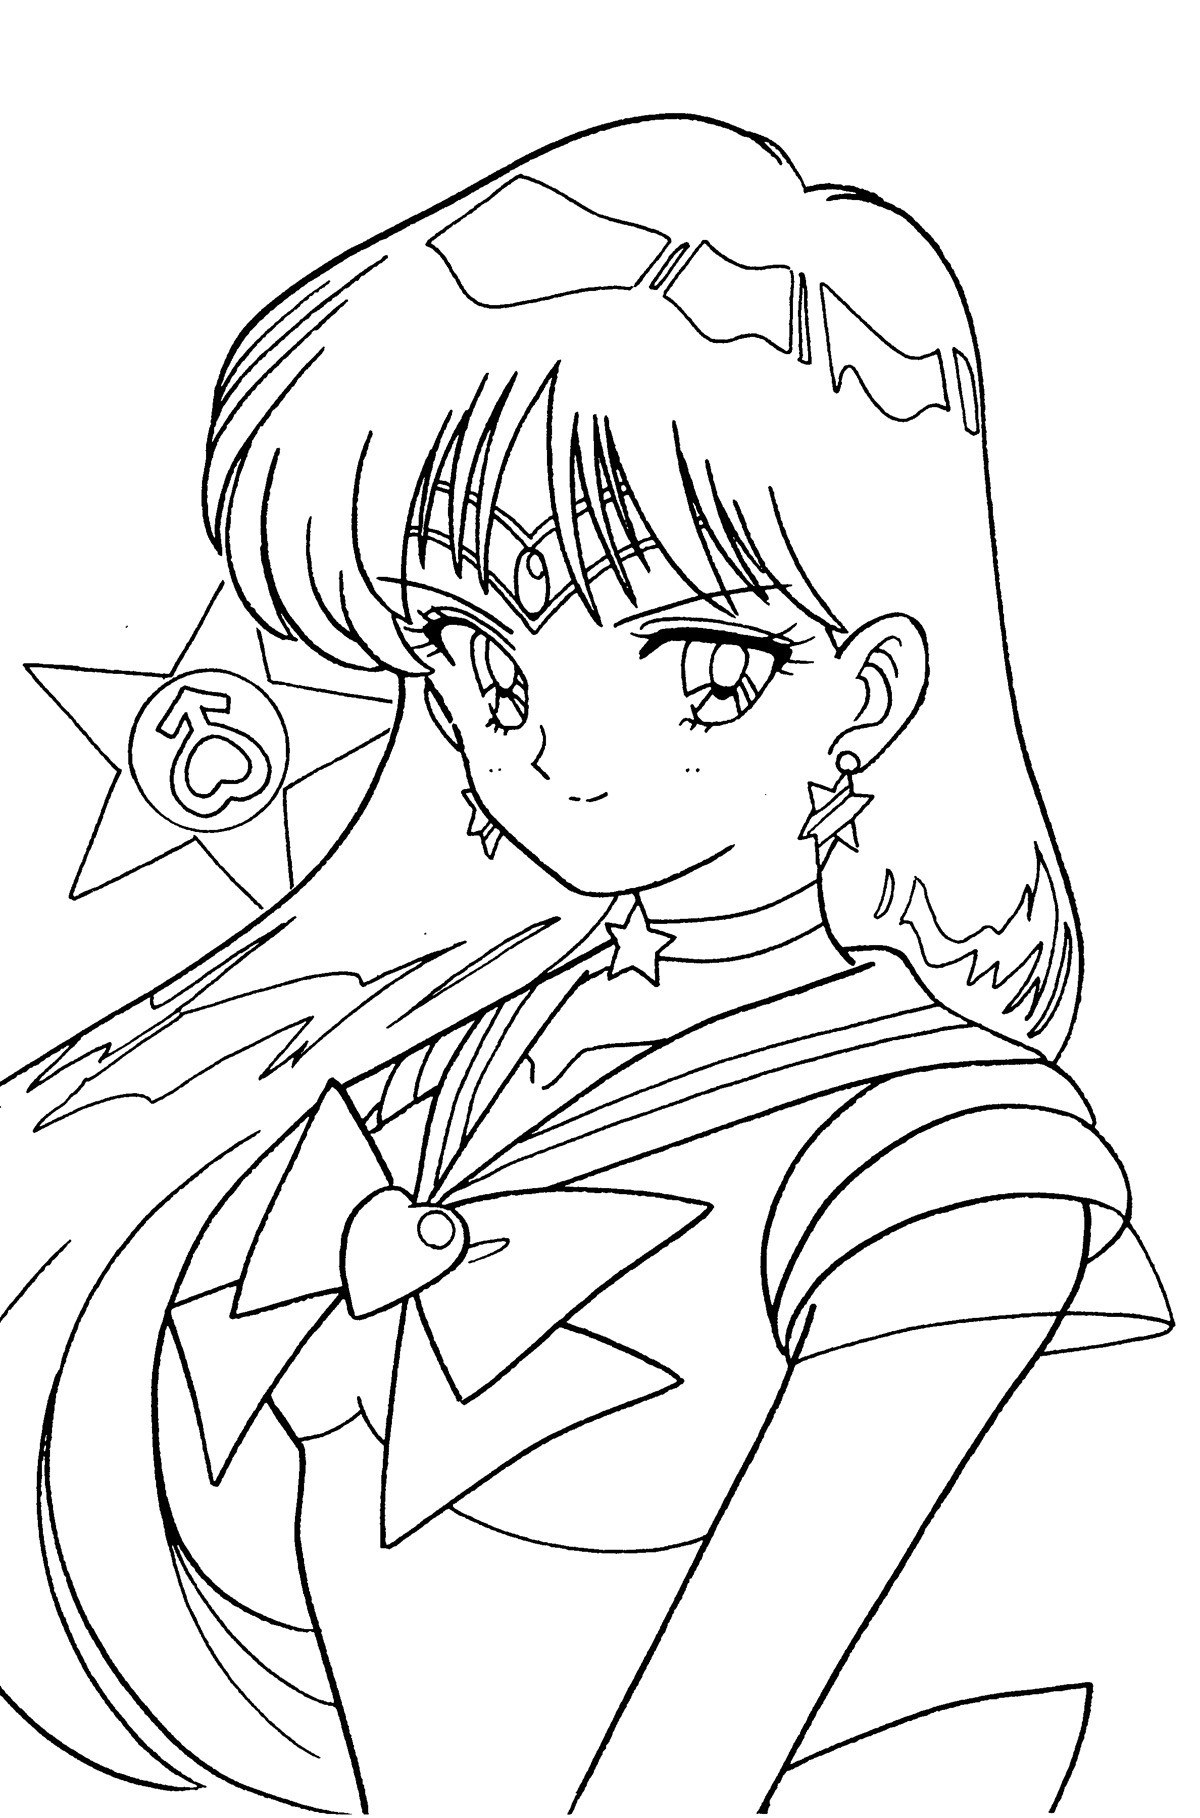 Mars Coloring Pages
 Sailor Moon Coloring Pages coloringsuite